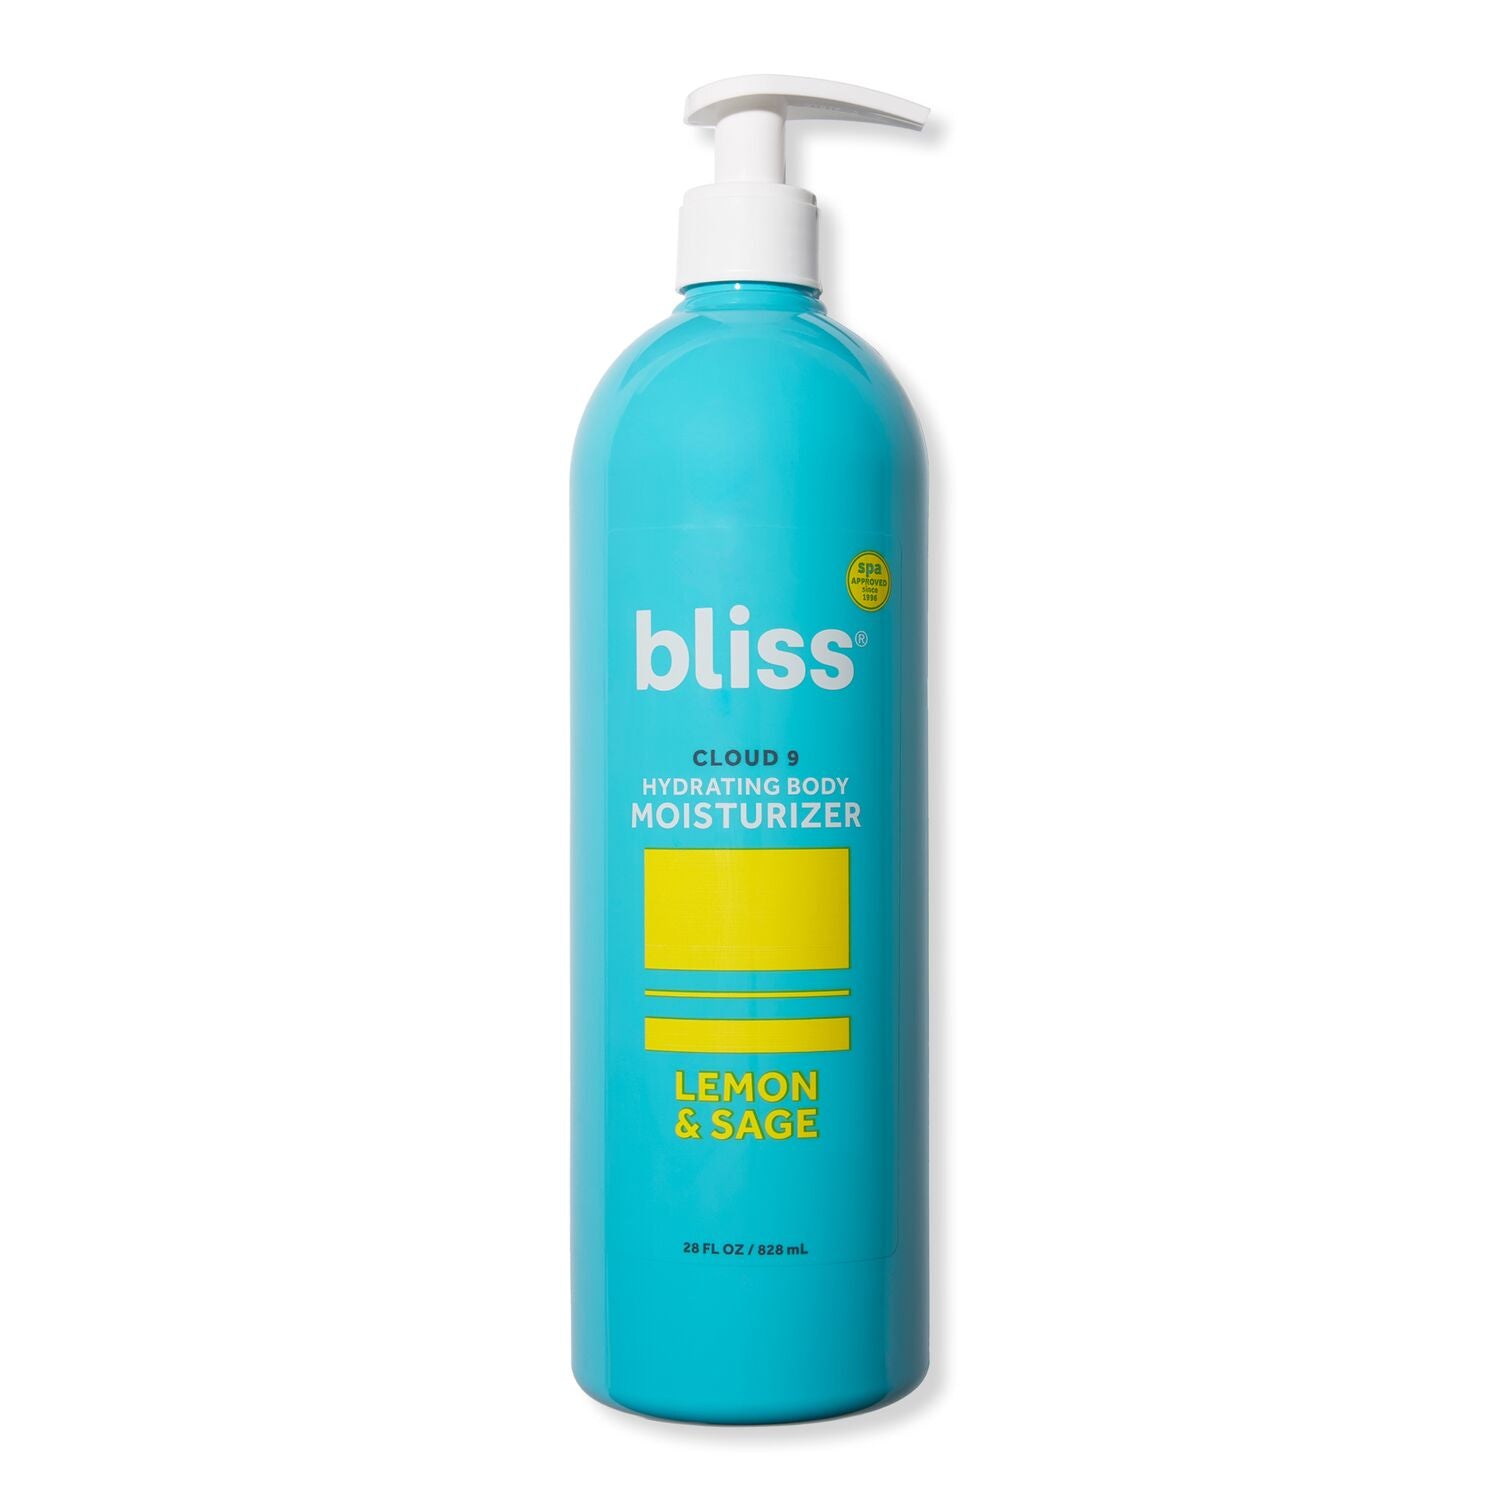 Bliss World Store Cloud 9 Hydrating Body Moisturizer, Lemon & Sage With Shea Butter And Hyaluronic Acid